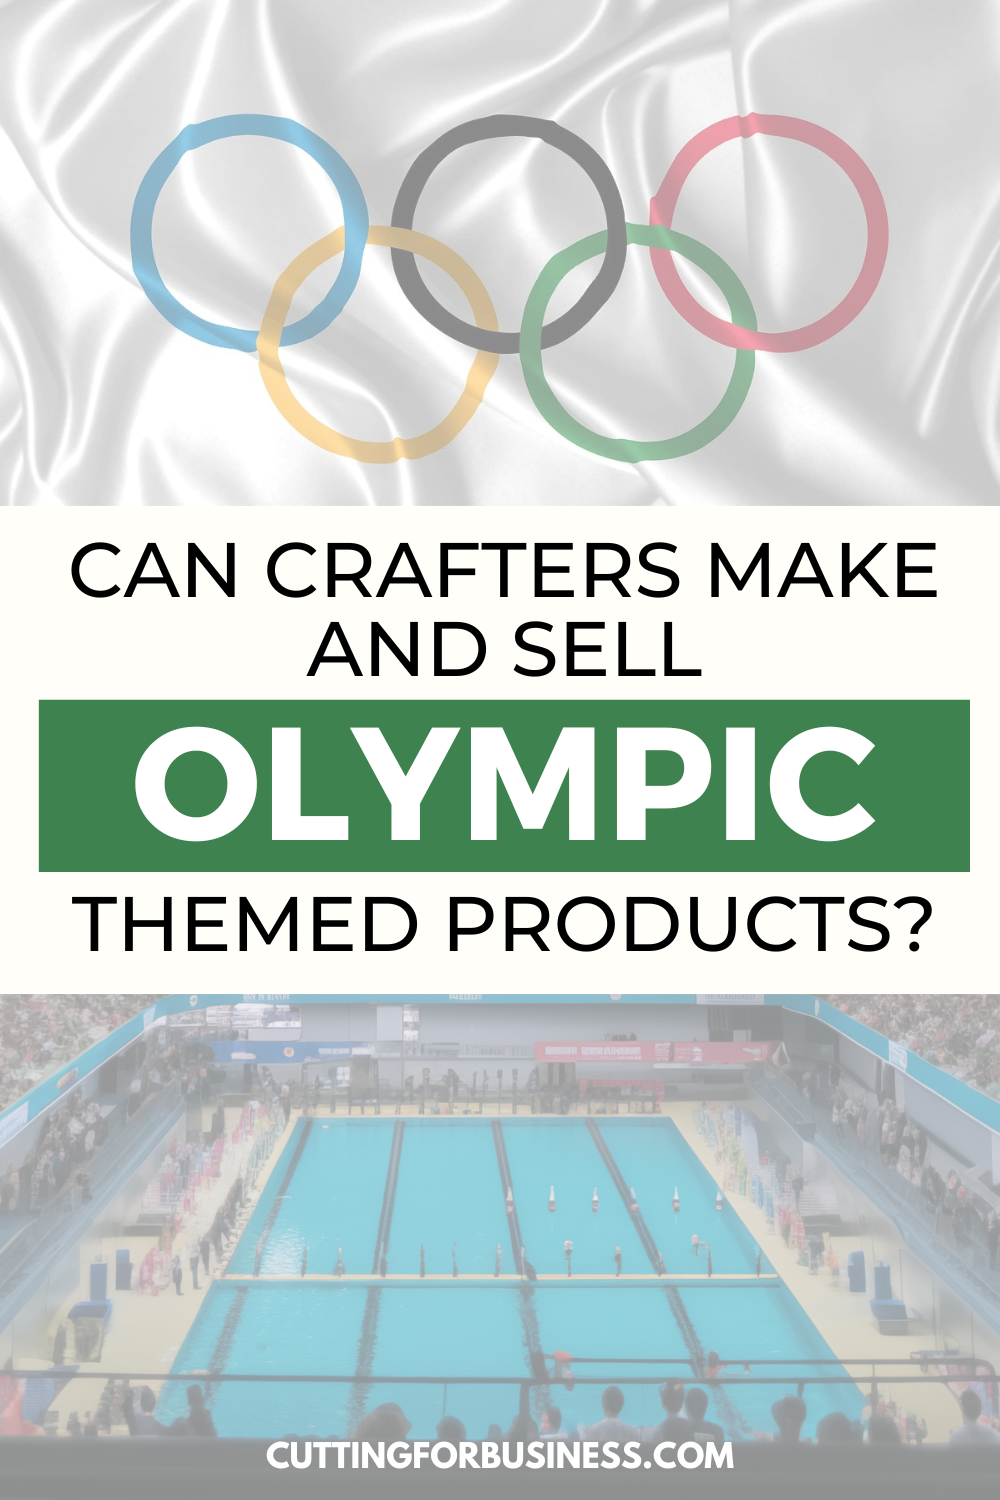 Can Crafters Make and Sell Olympic Themed Products? - cuttingforbusiness.com